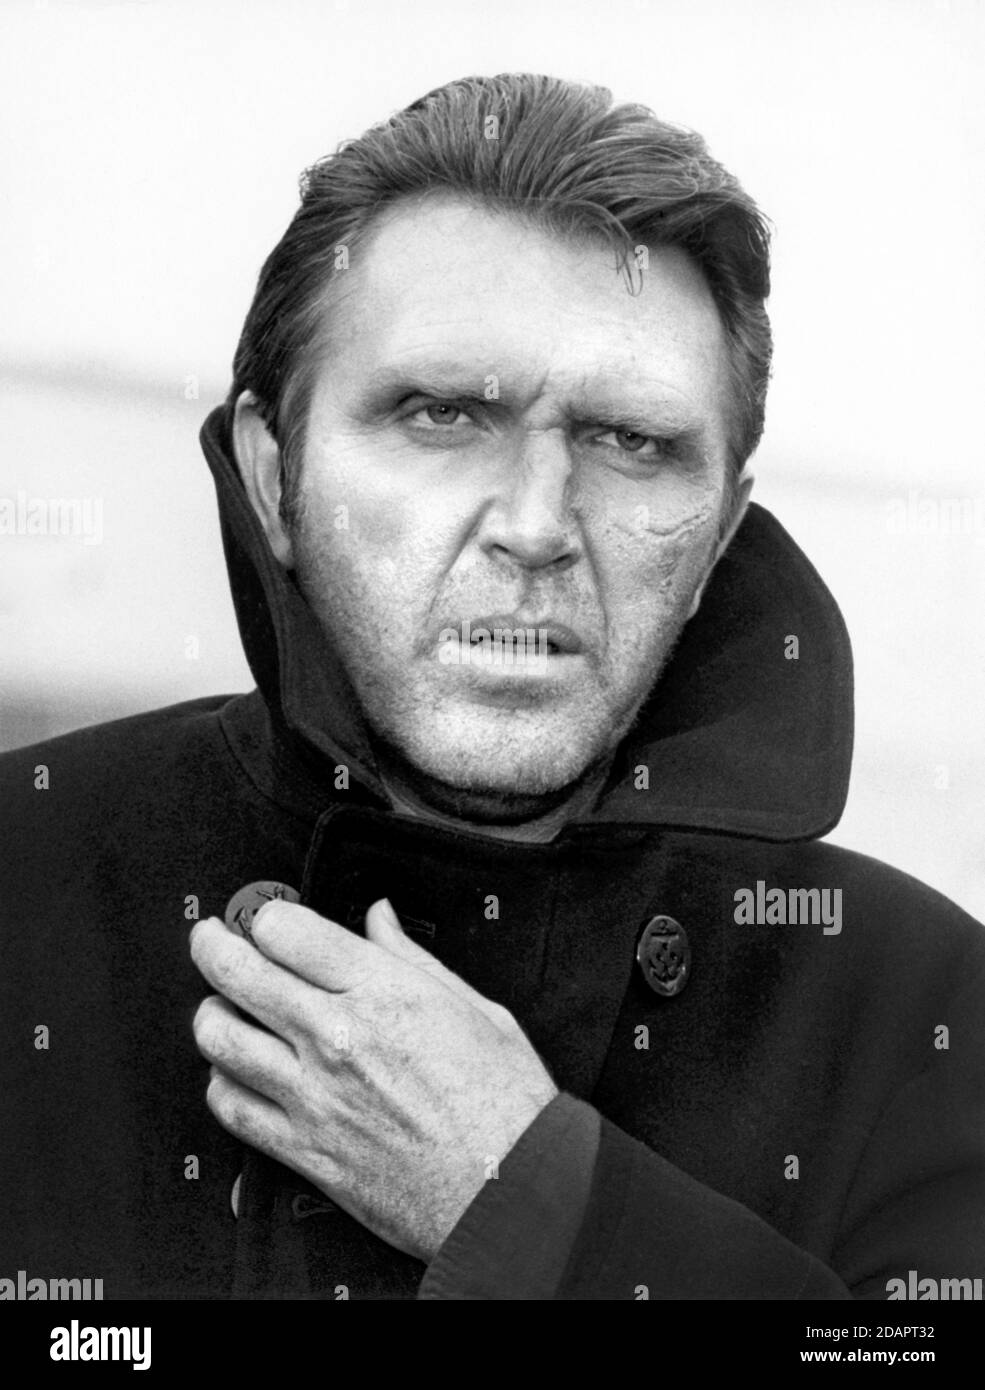 Robert Lansing, Head and Shoulders Publicity Portrait for the TV Movie, 'Killer by Night', CBS-TV, 1972 Stockfoto